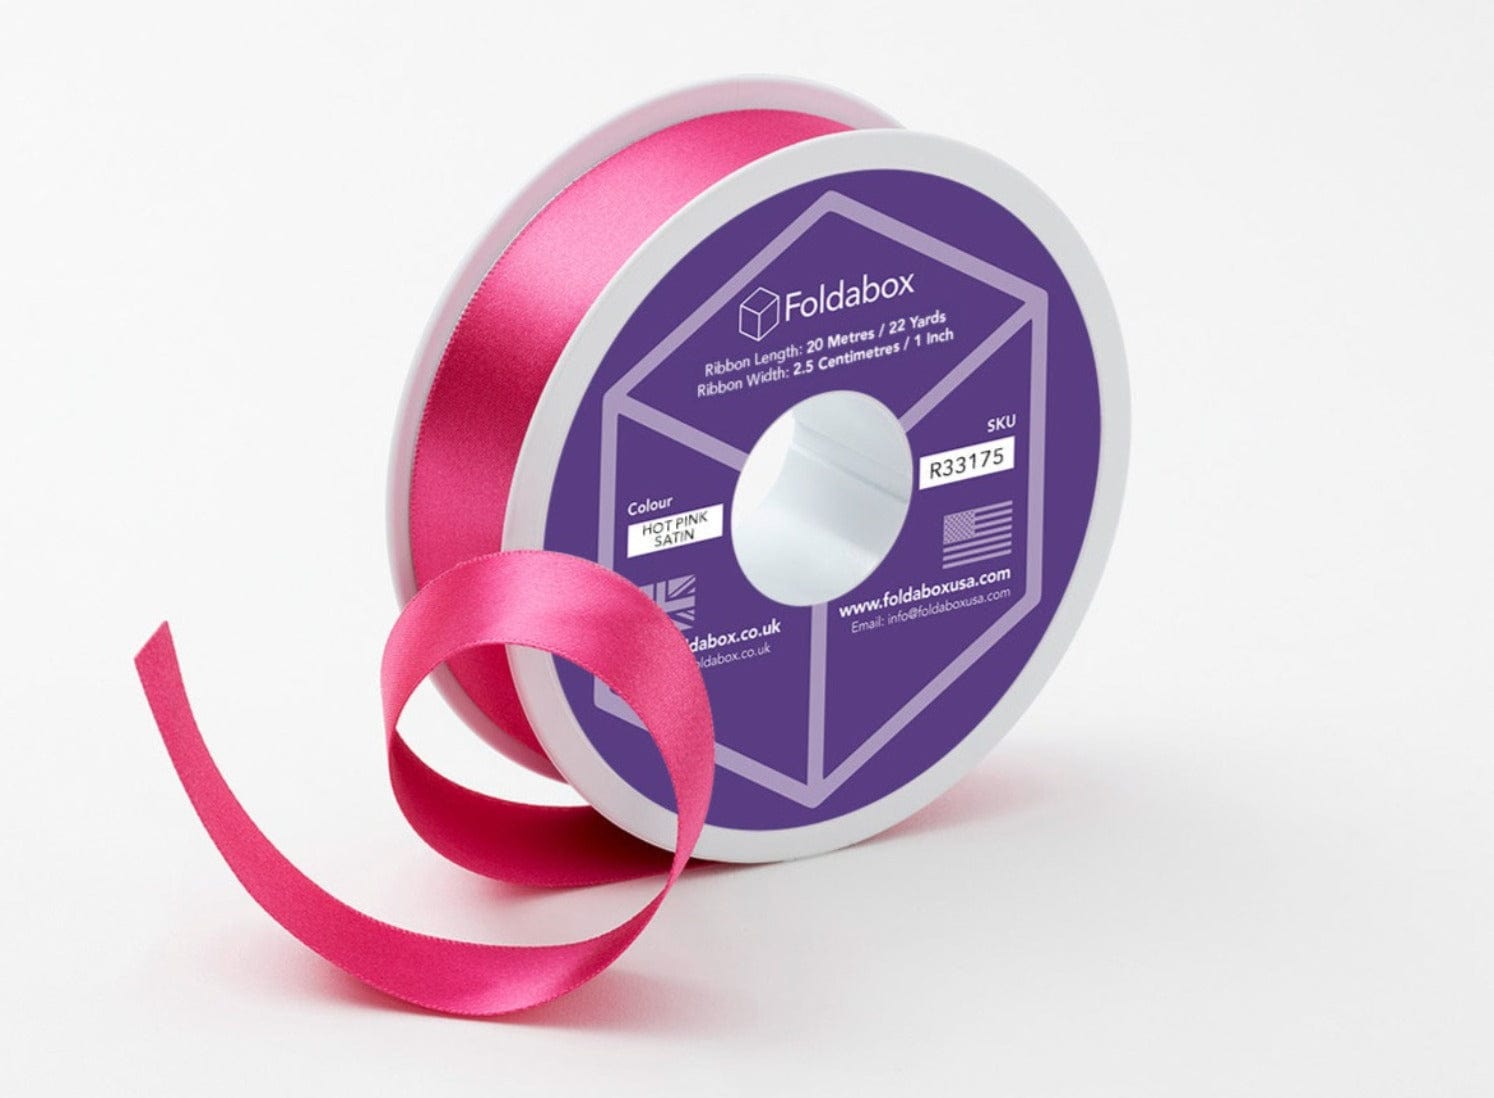 Hot Pink 20m Recycled Satin Ribbon Roll from Foldabox